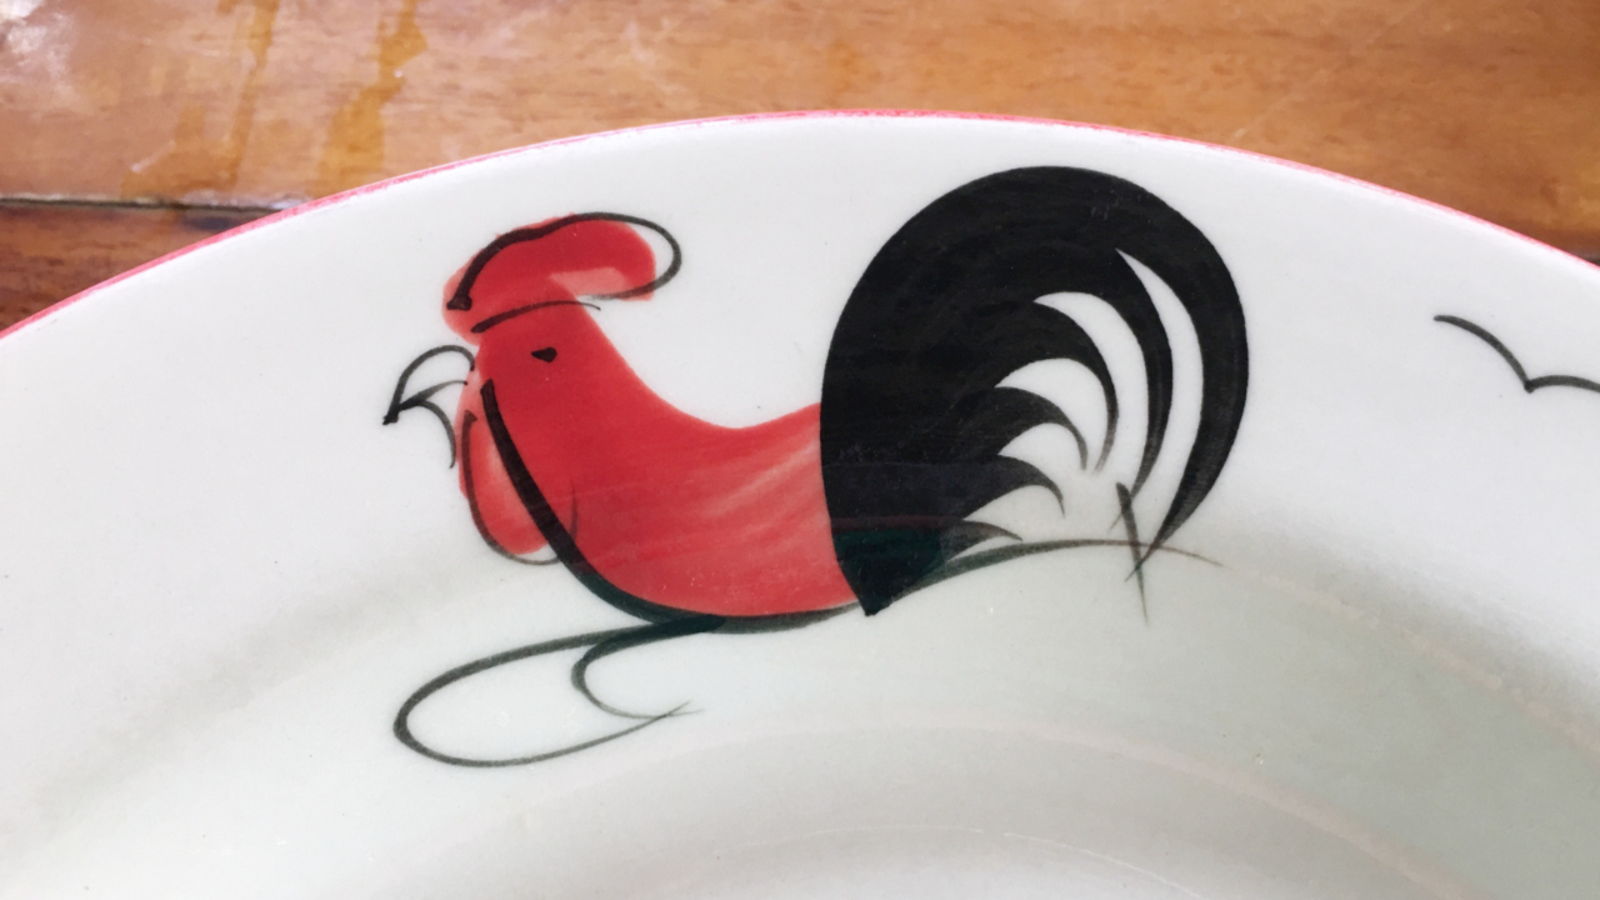 What Makes The Rooster Design On A Bowl So Special?